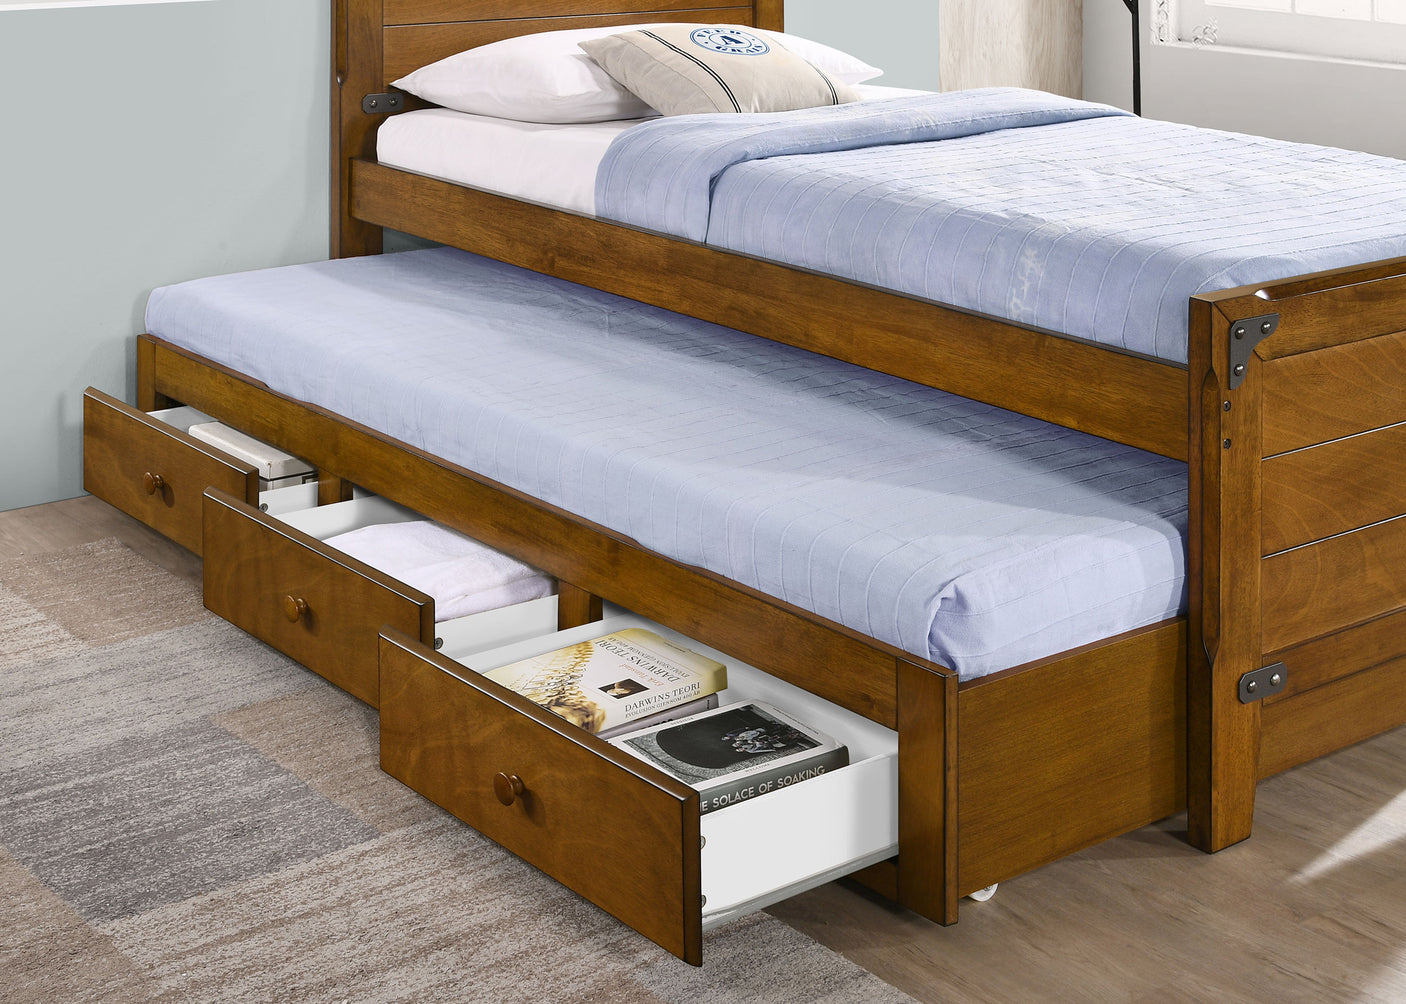 Twin Bed W/ Trundle - Granger Wood Twin Storage Captains Bed Rustic Honey